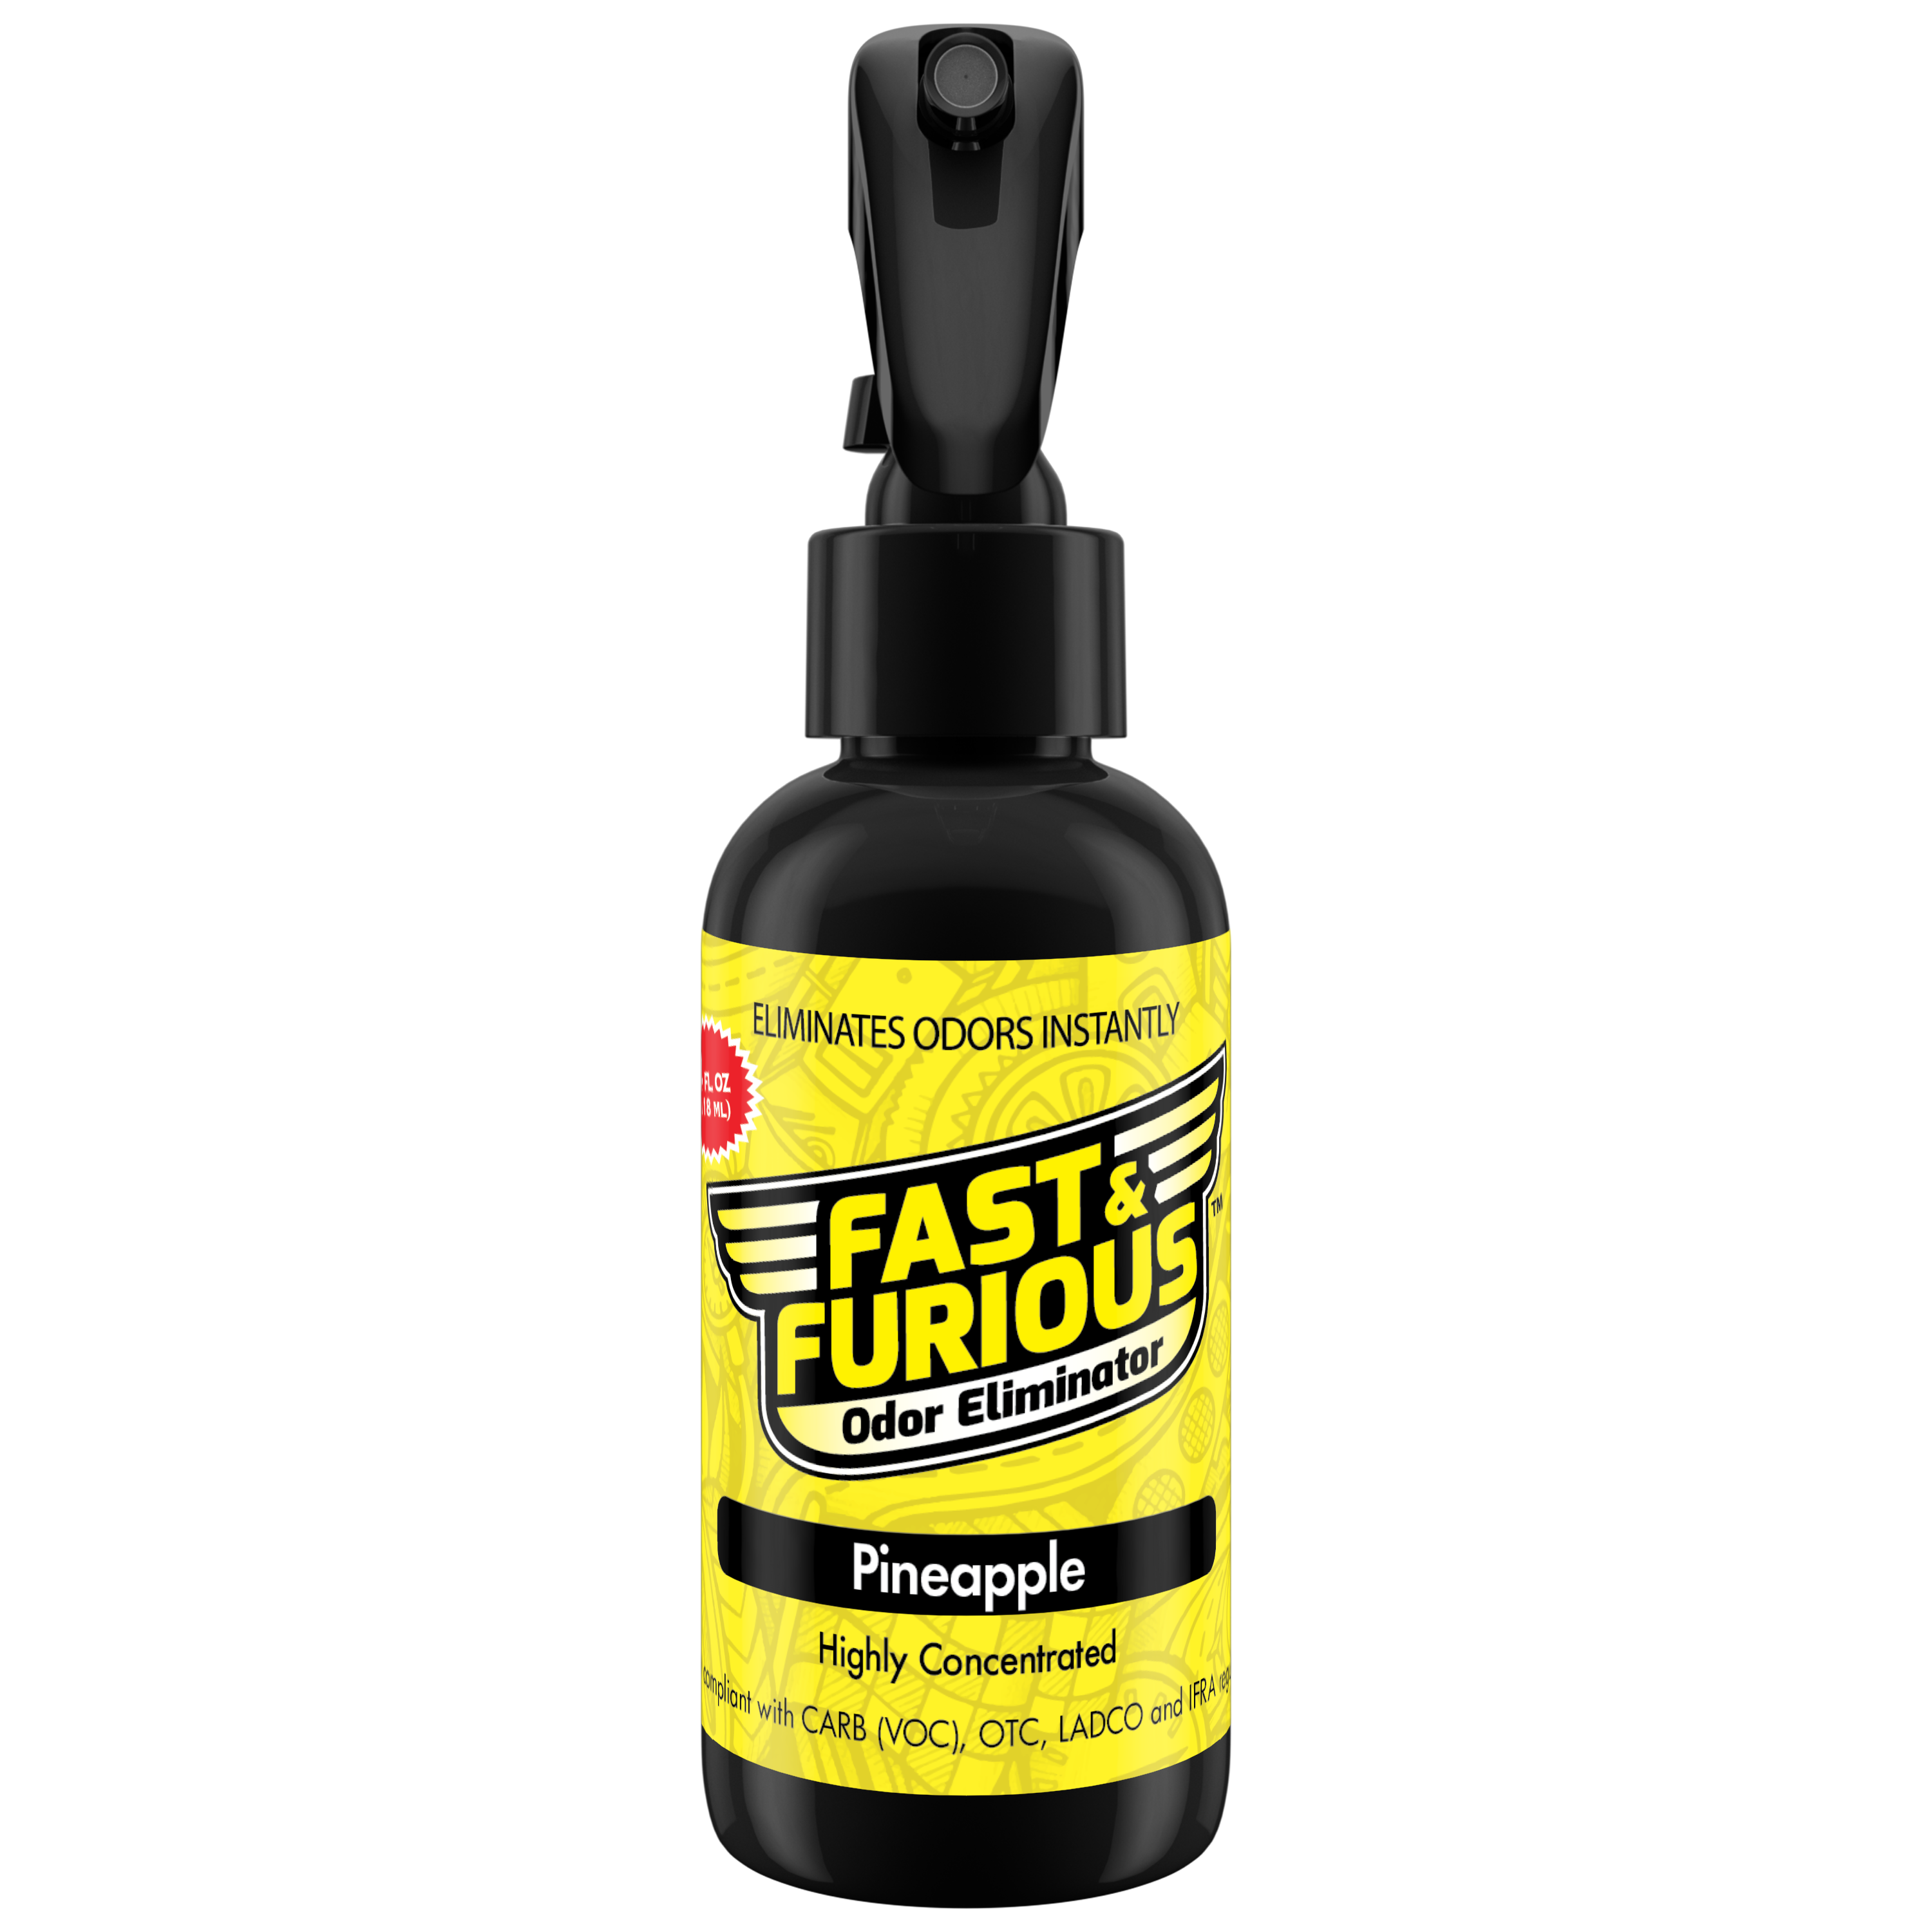 Fast and Furious Odor Eliminator - Pineapple Scent